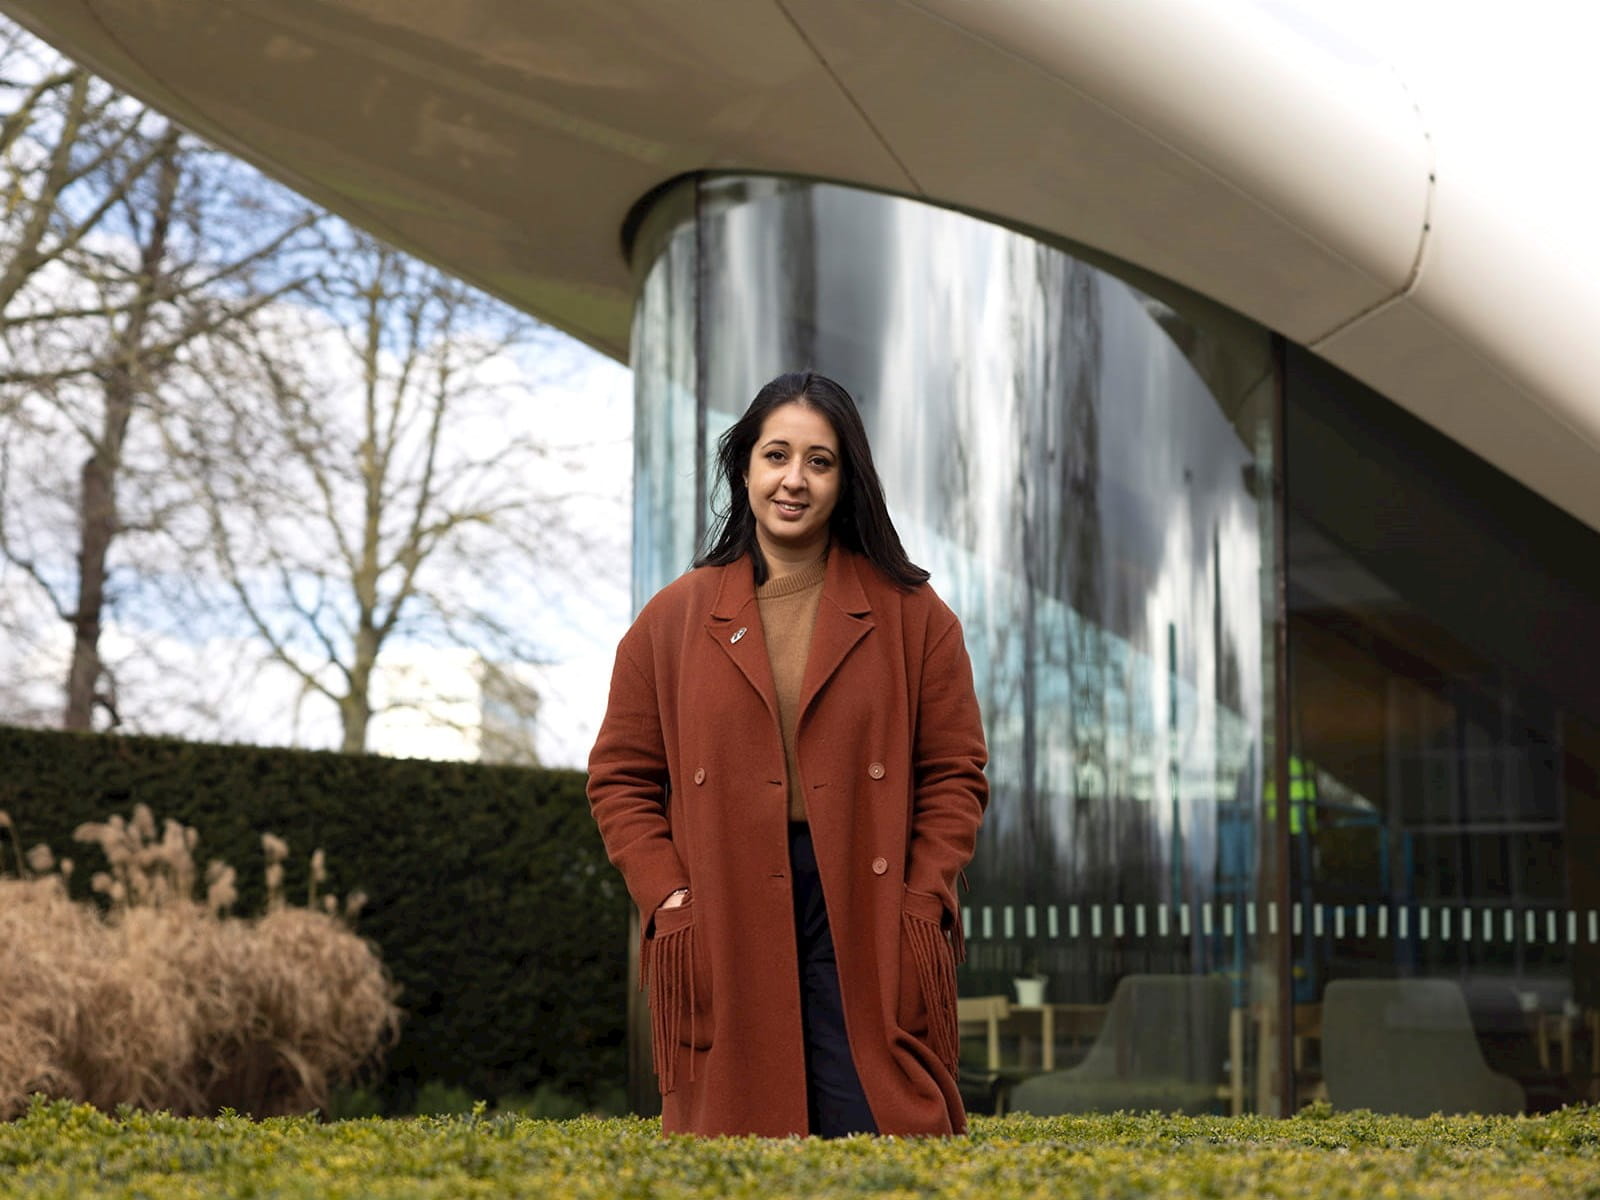 Alina Cummins, Head of Finance at Serpentine, young woman standing in front of modern glass building plants trees